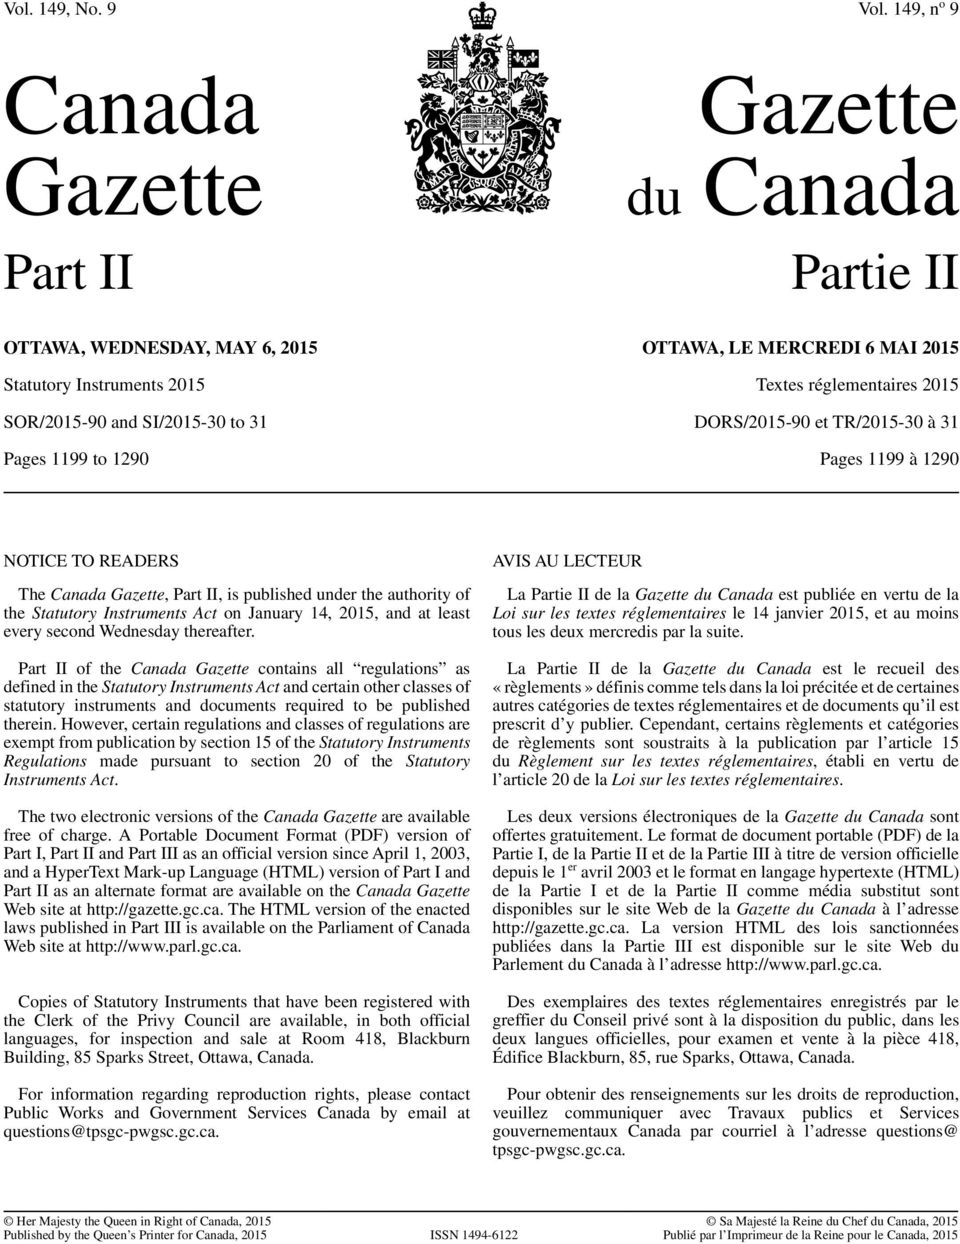 2015 Textes réglementaires 2015 DORS/2015-90 et TR/2015-30 à 31 Pages 1199 à 1290 NOTICE TO READERS The Canada Gazette, Part II, is published under the authority of the Statutory Instruments Act on